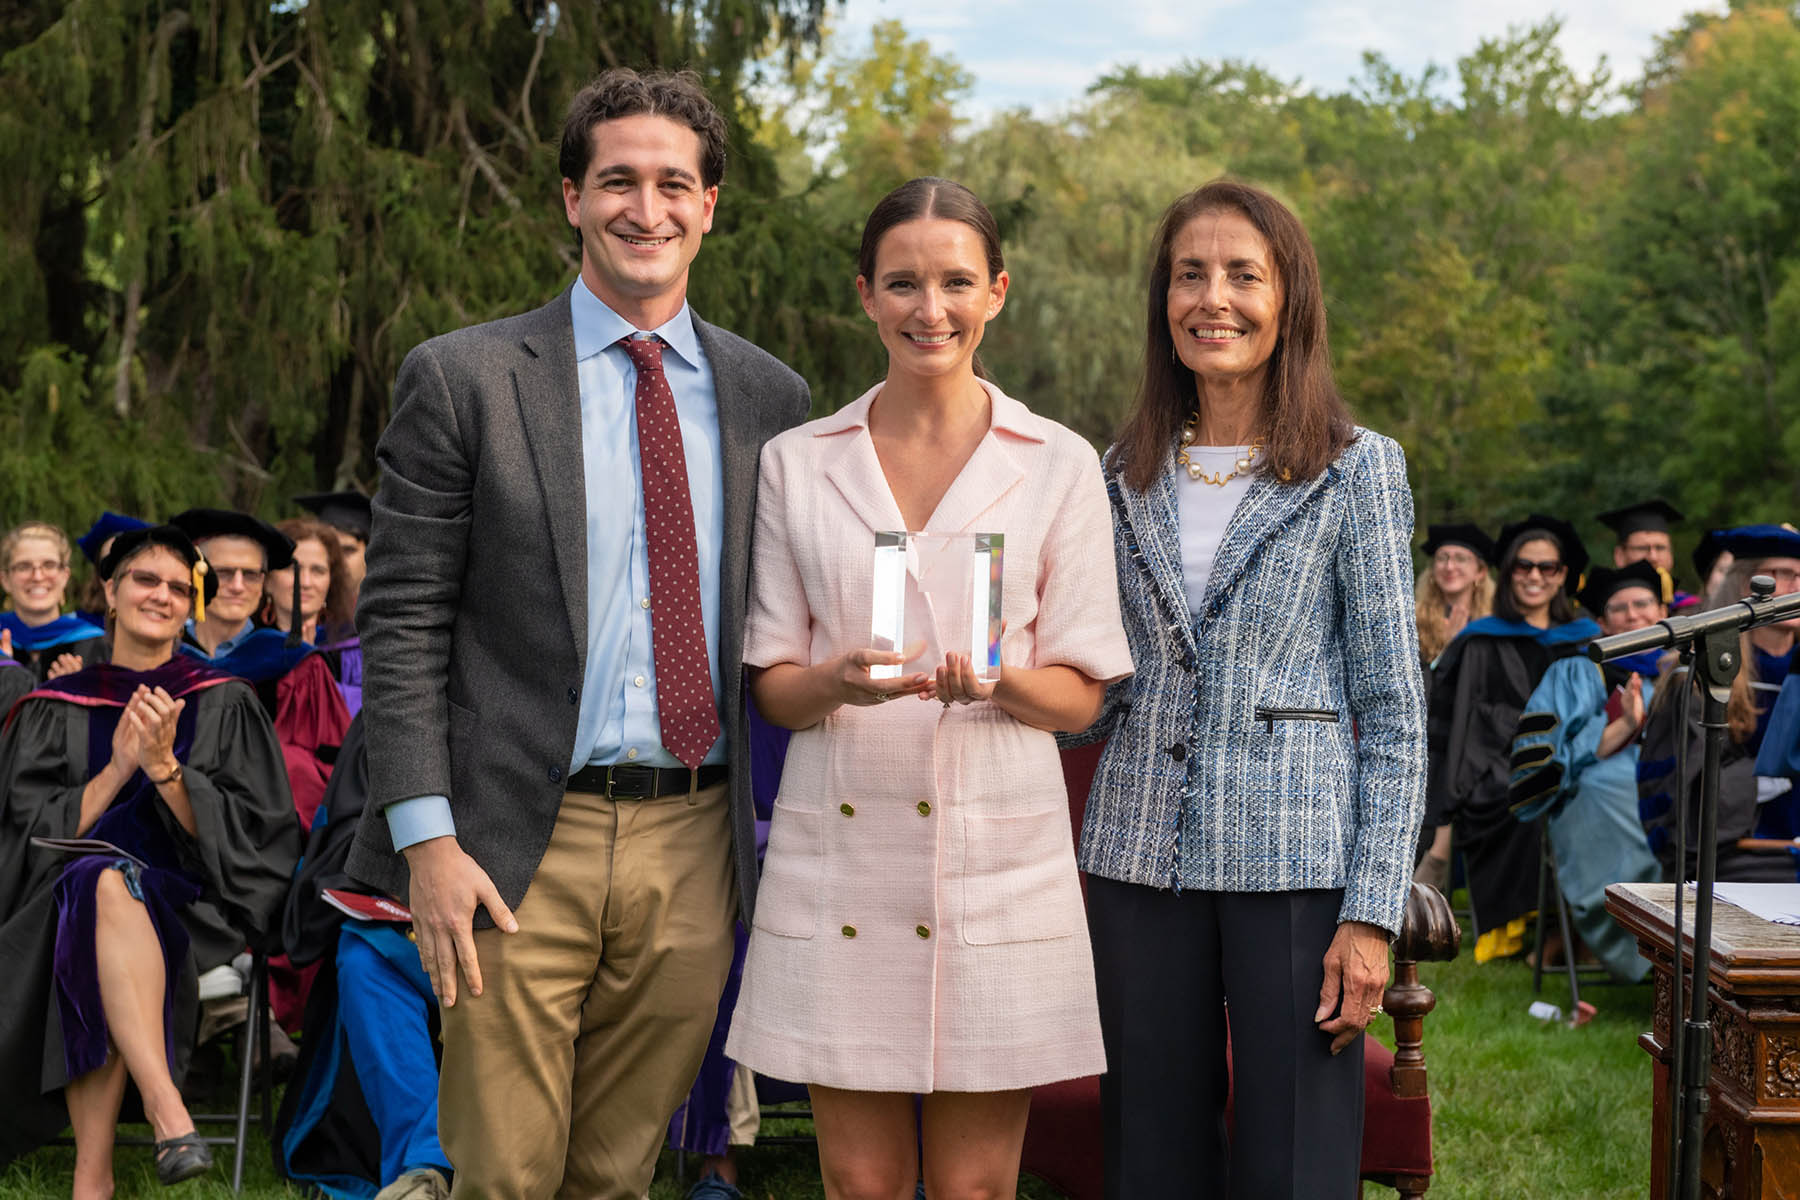 During the ceremony, AAVC Vice Presidents Monica Vachher ’77 and Brian Farkas ’10 bestowed AAVC’s Young Alumnae/i Service Award on Marie Dugo Dilemani ’11.